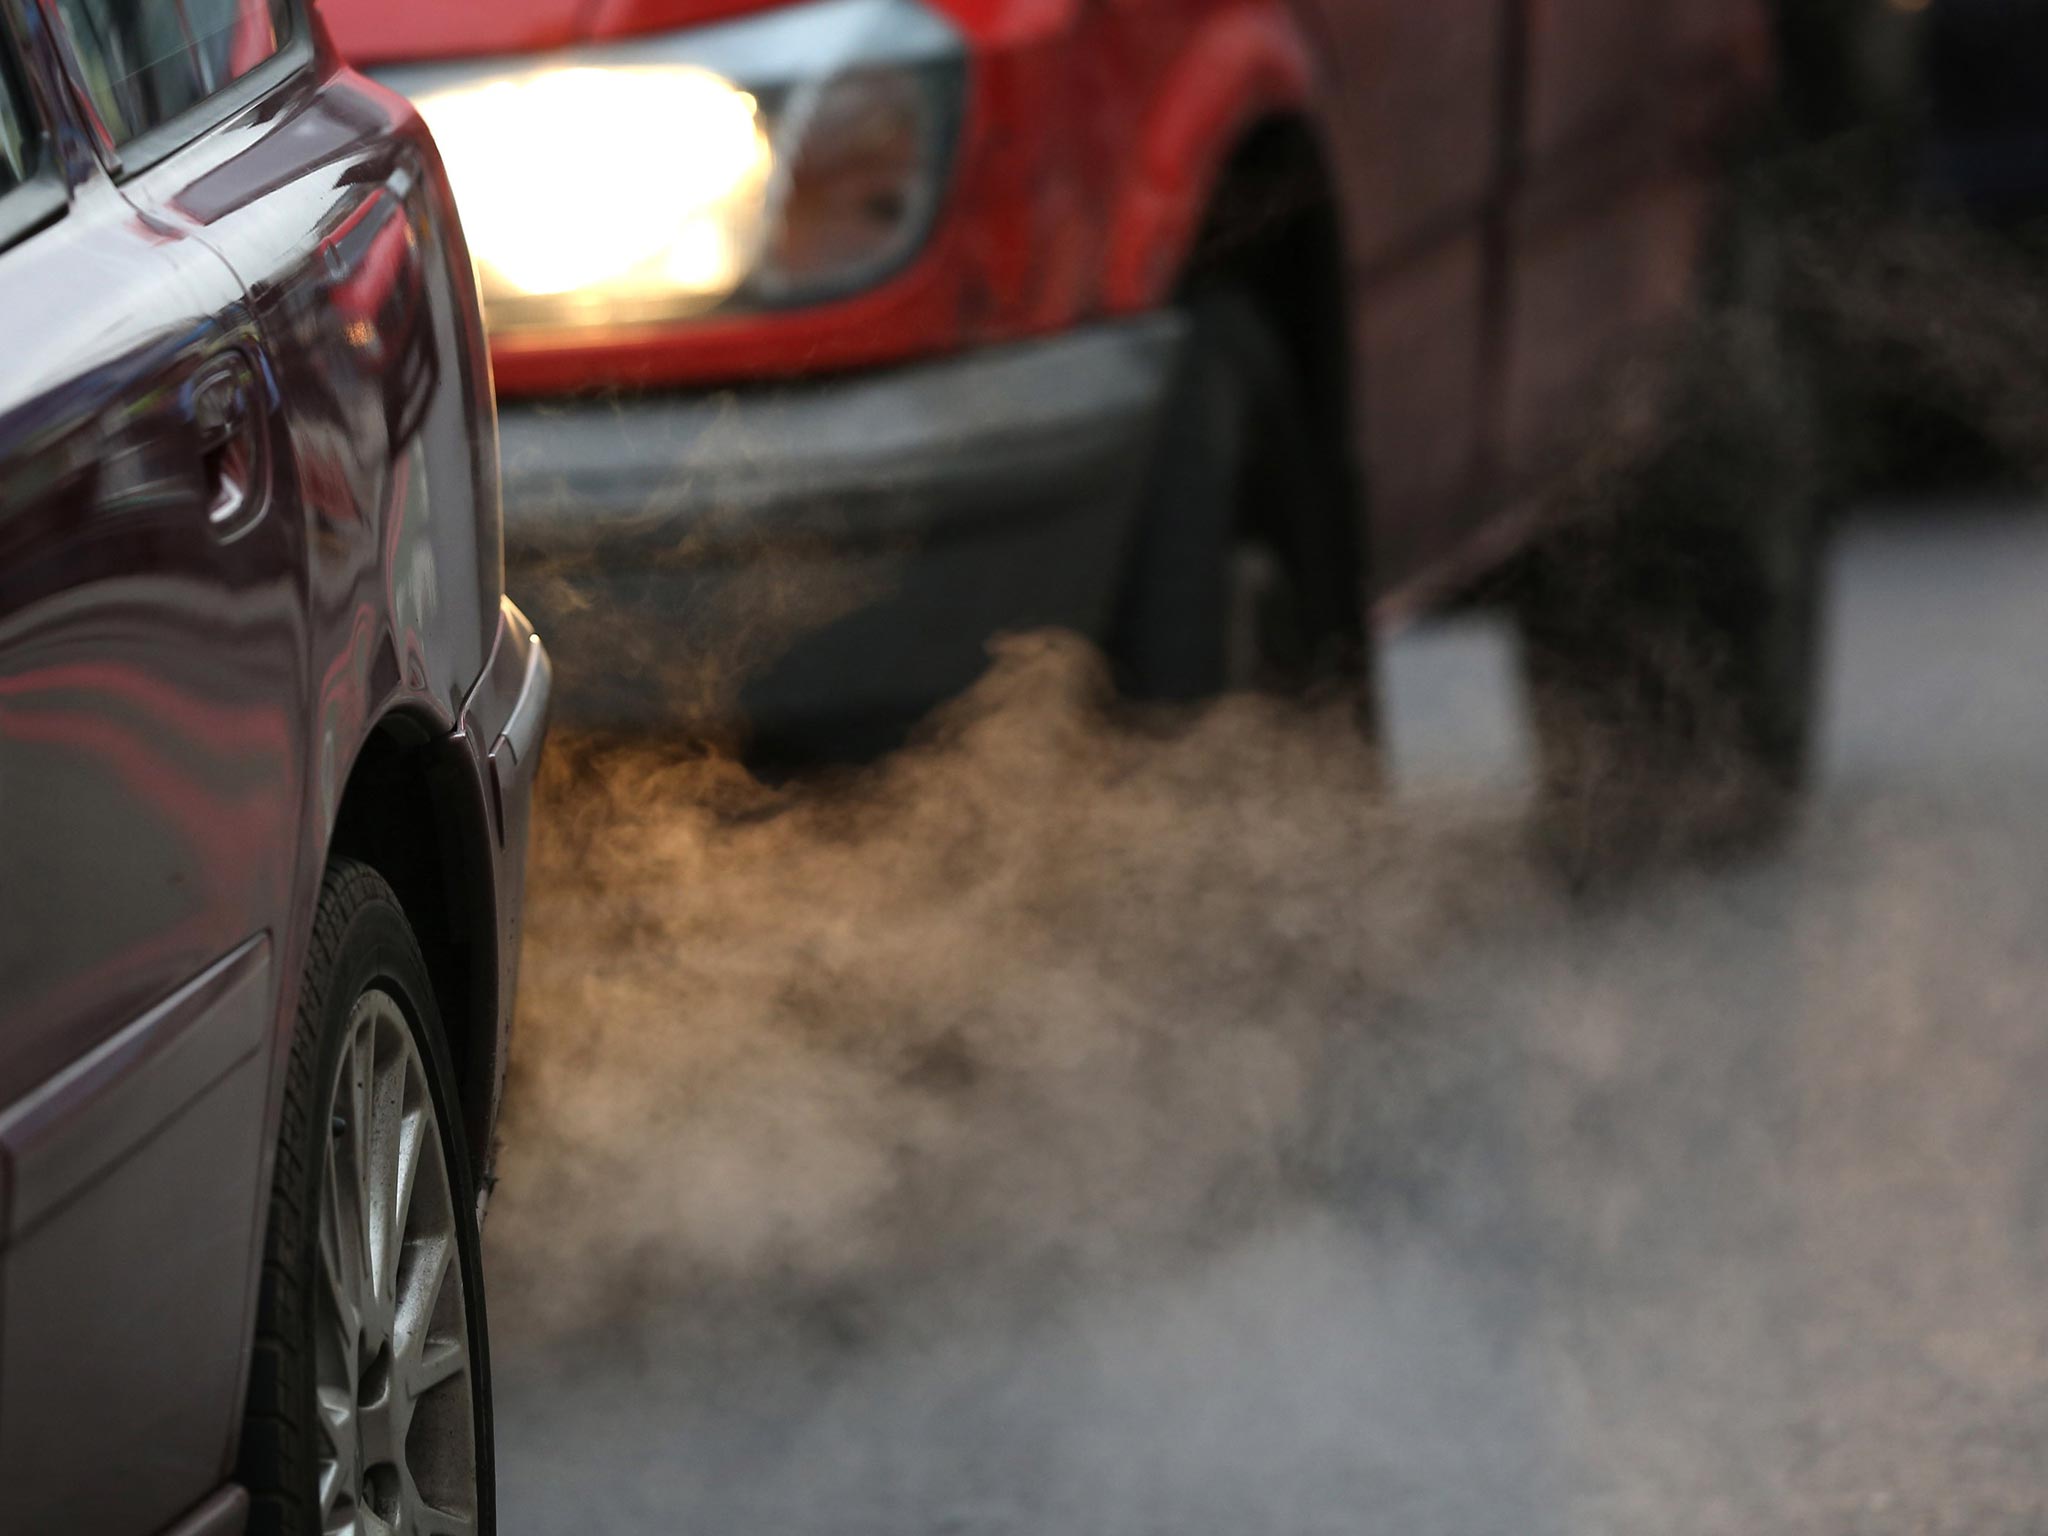 Exhaust fumes from a car in London